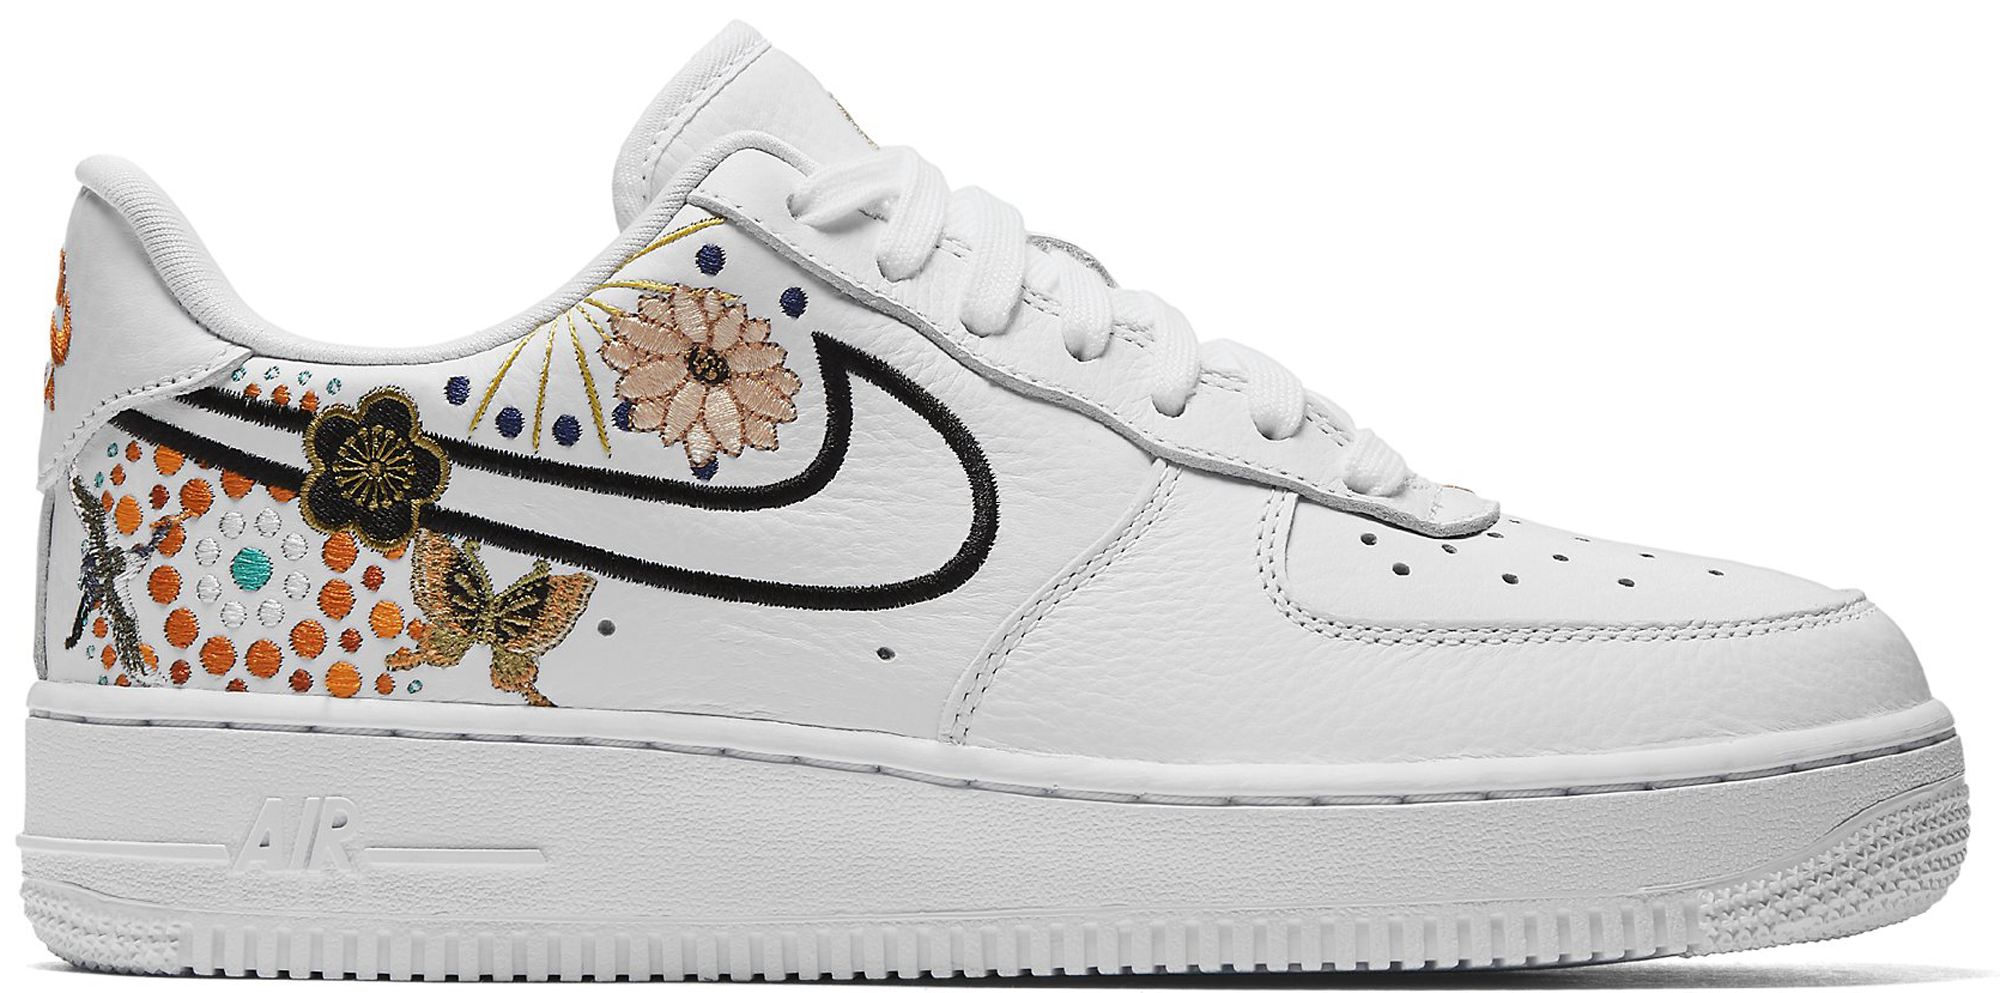 Nike Air Force 1 Low Lunar New Year 